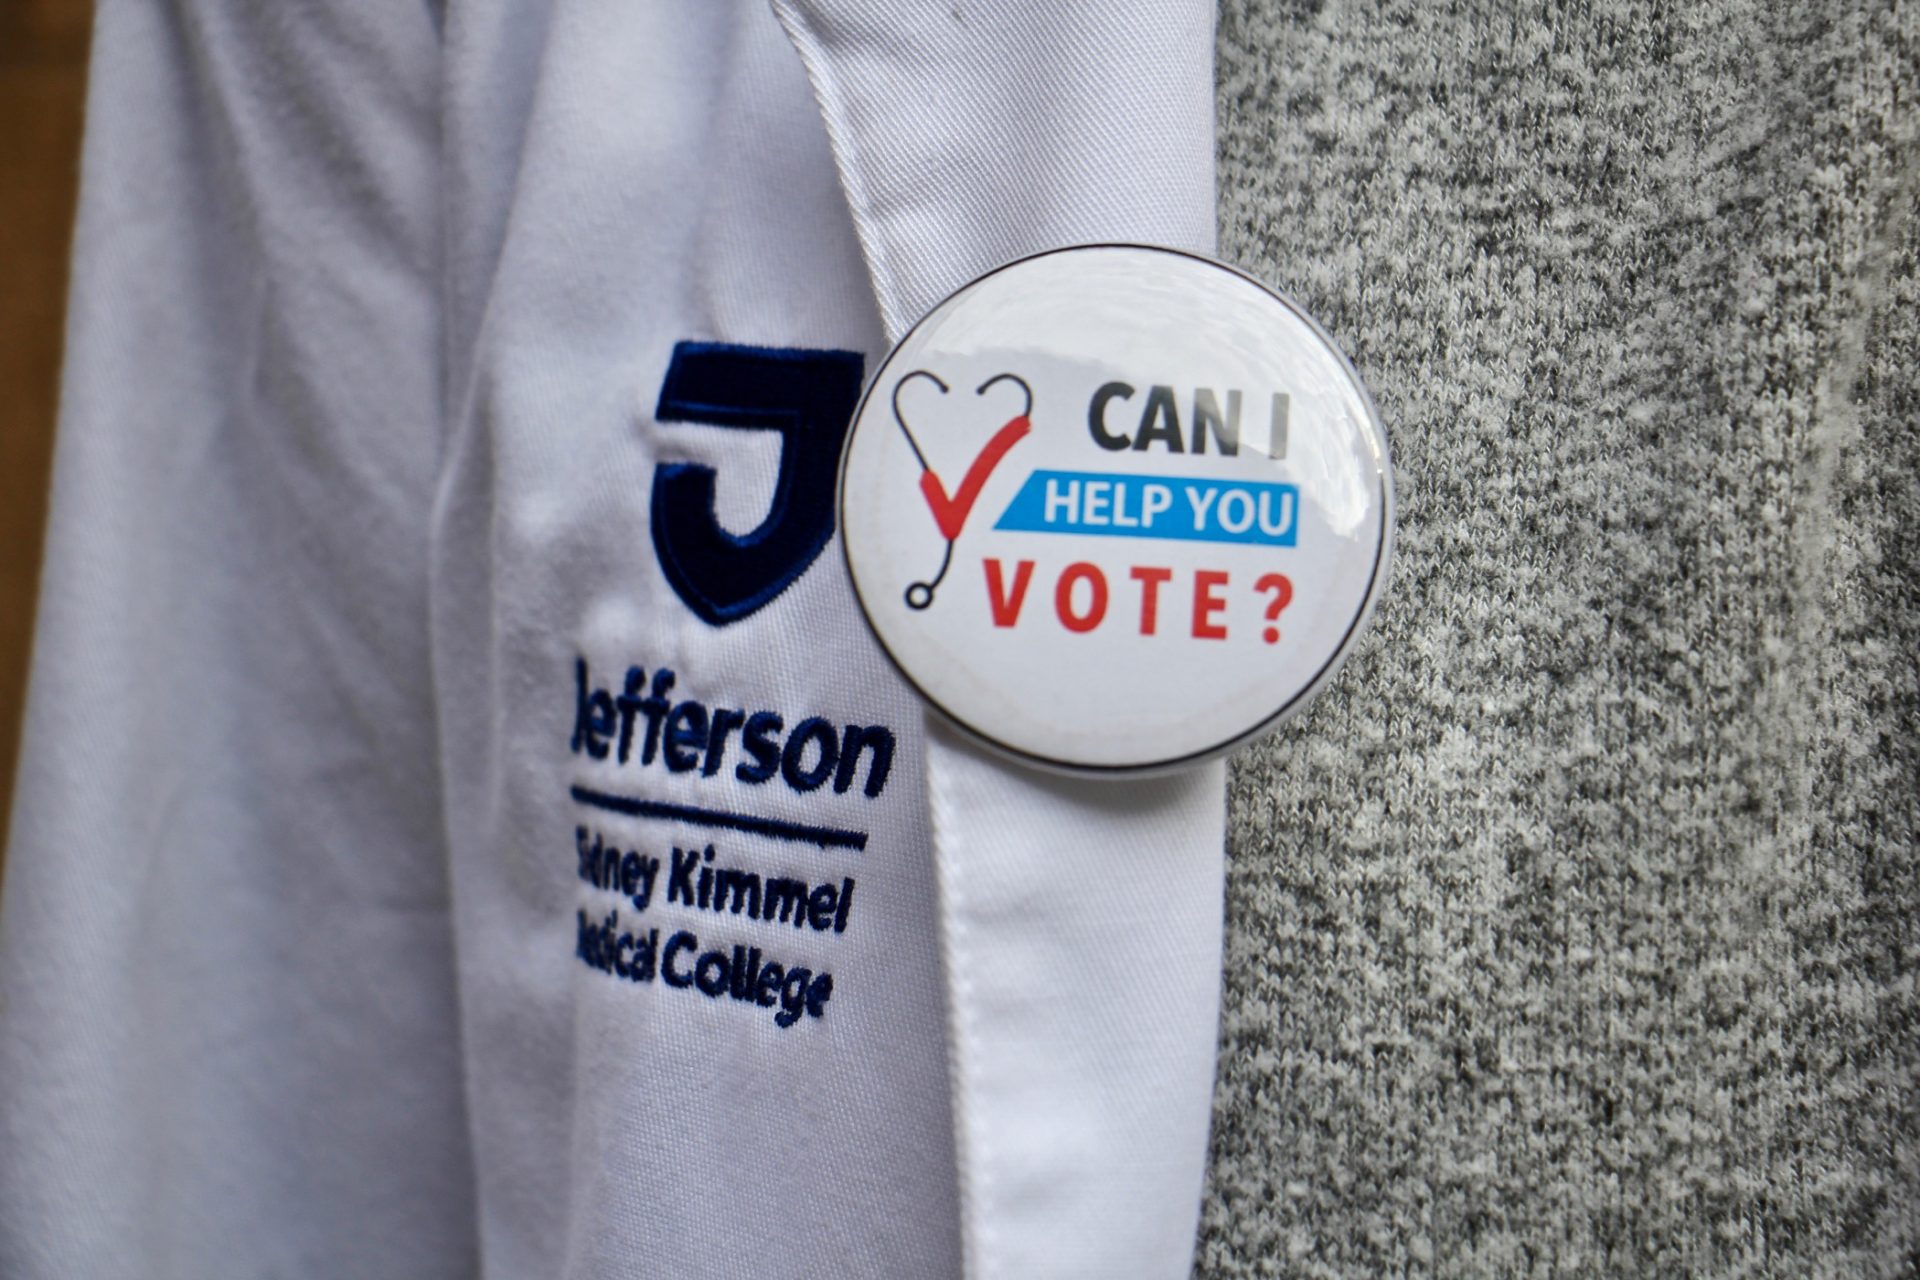 Jefferson University medical students are making sure that patients have an opportunity to vote.